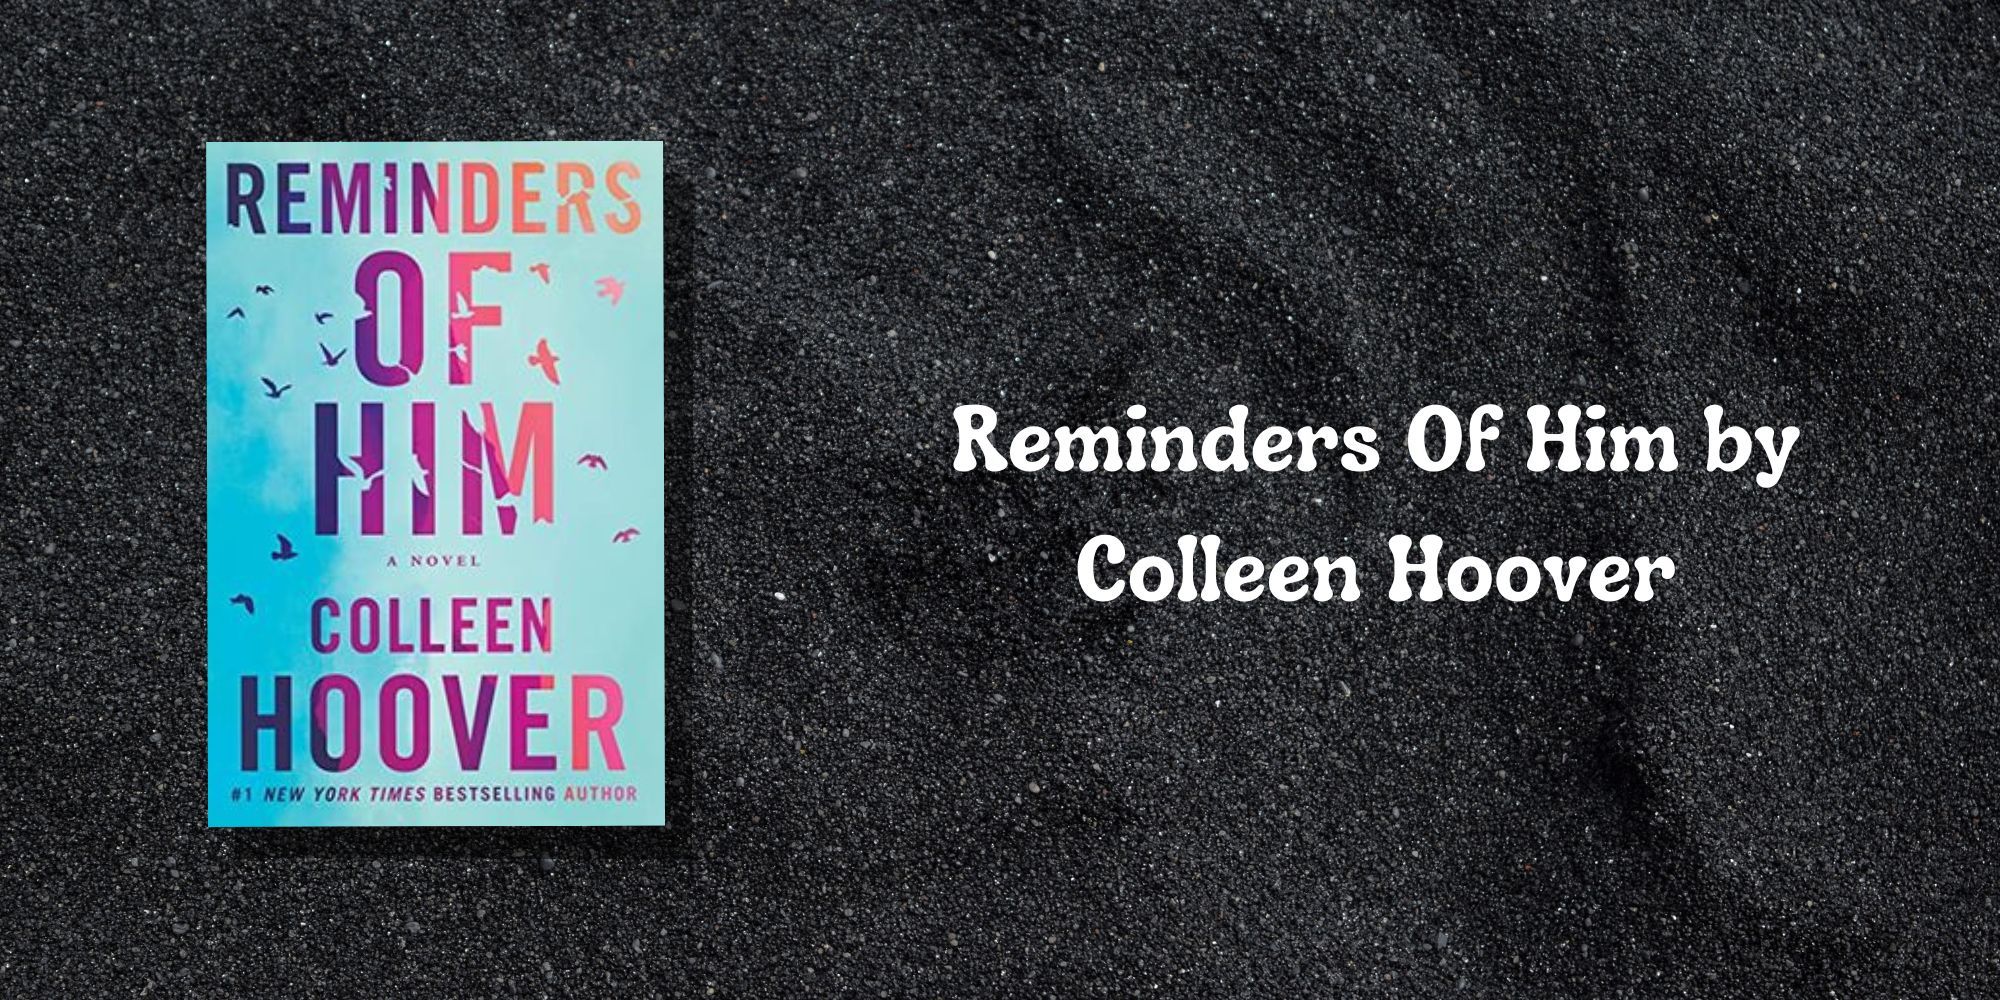 Cover of Her Reminders by Colin Hoover